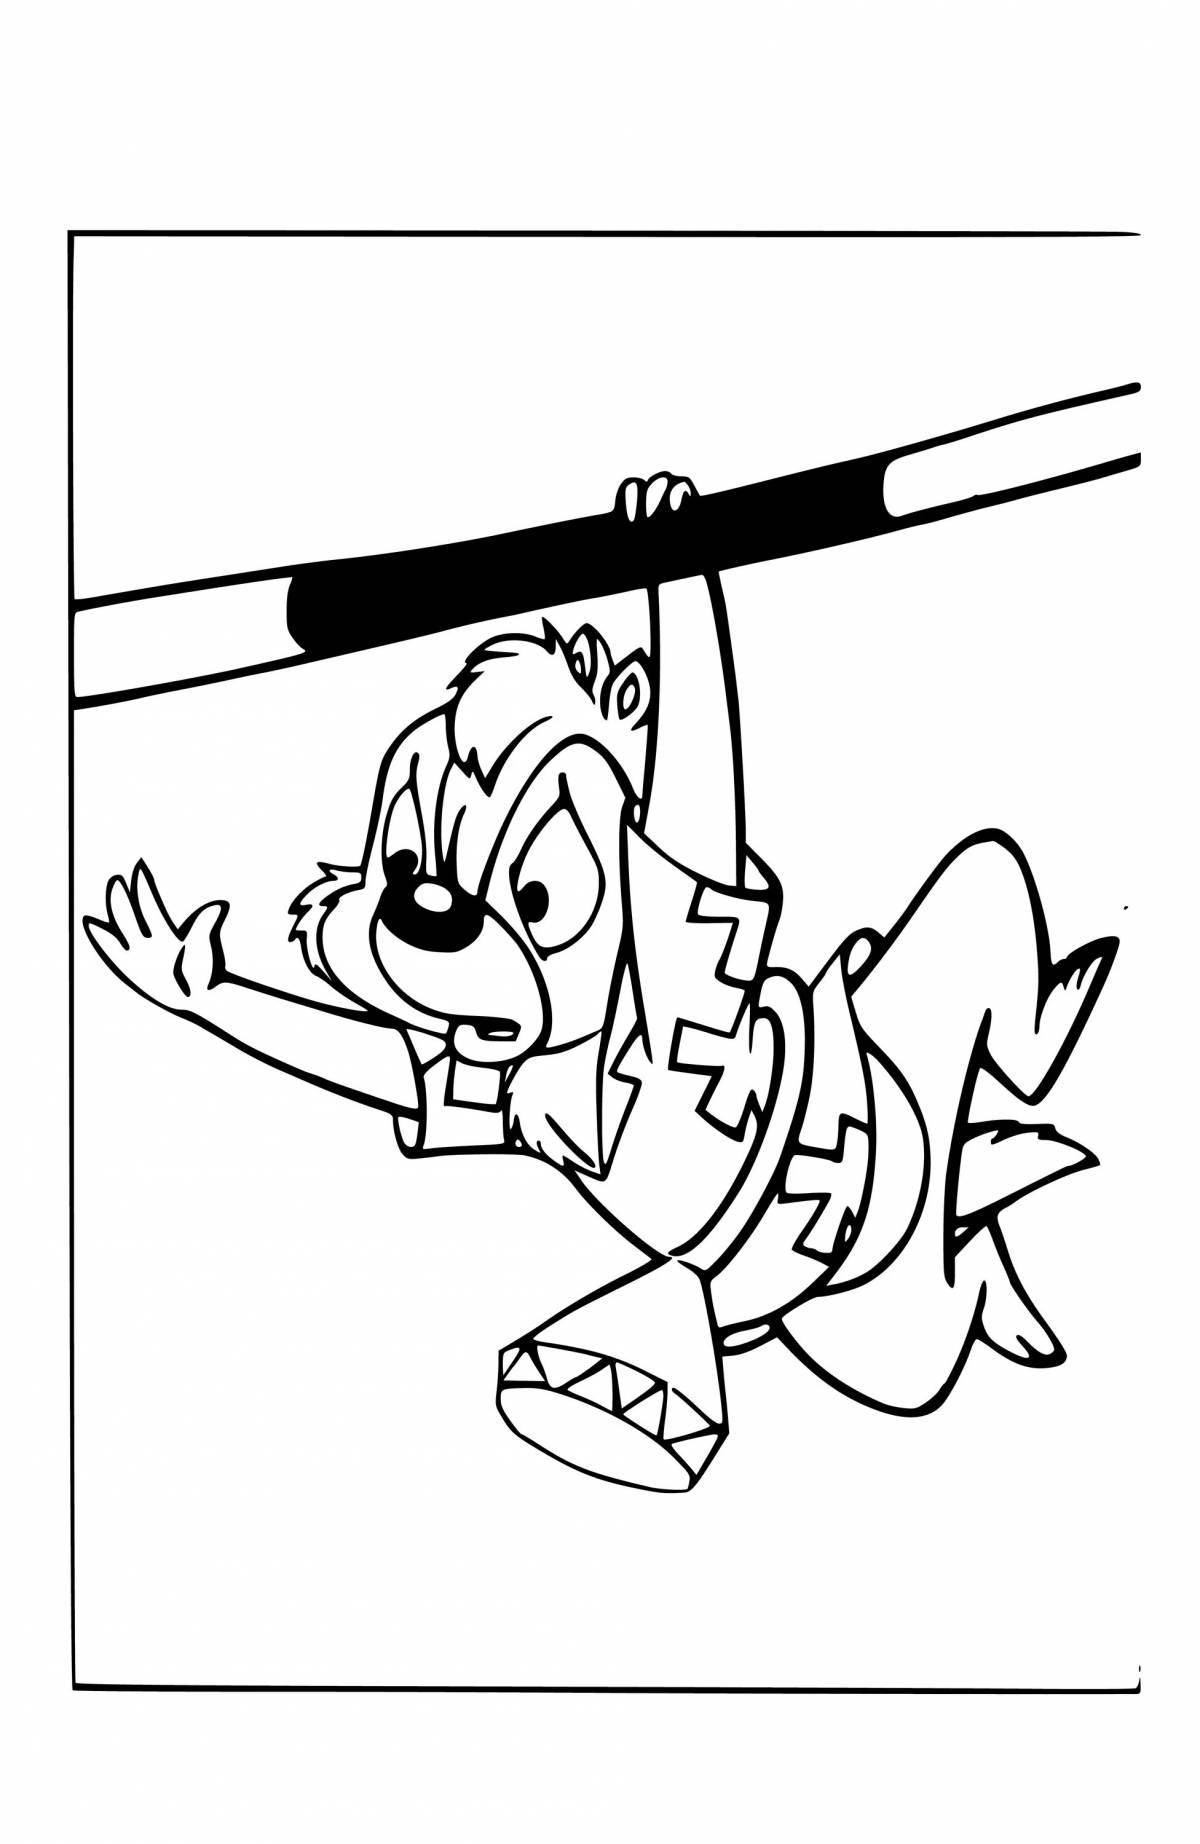 Color-explosion chip 'n dale rescue rangers coloring page